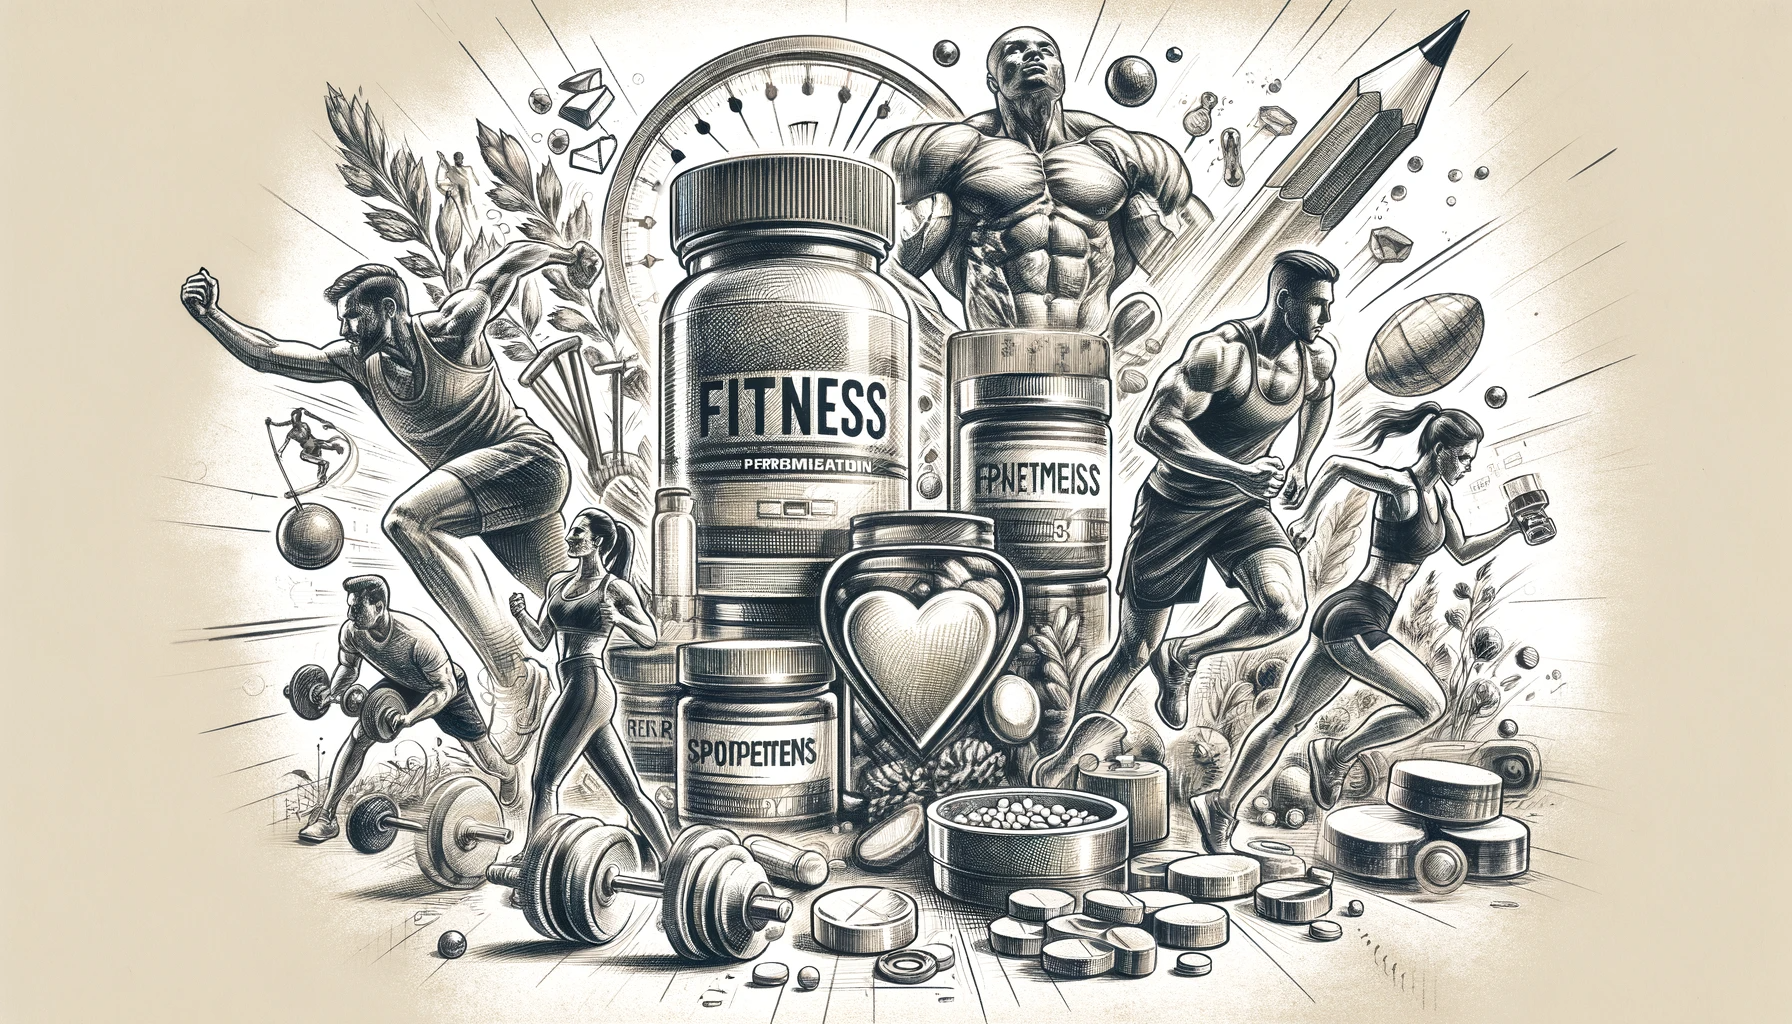 Hand-drawn pencil sketch of fitness and supplementation themes